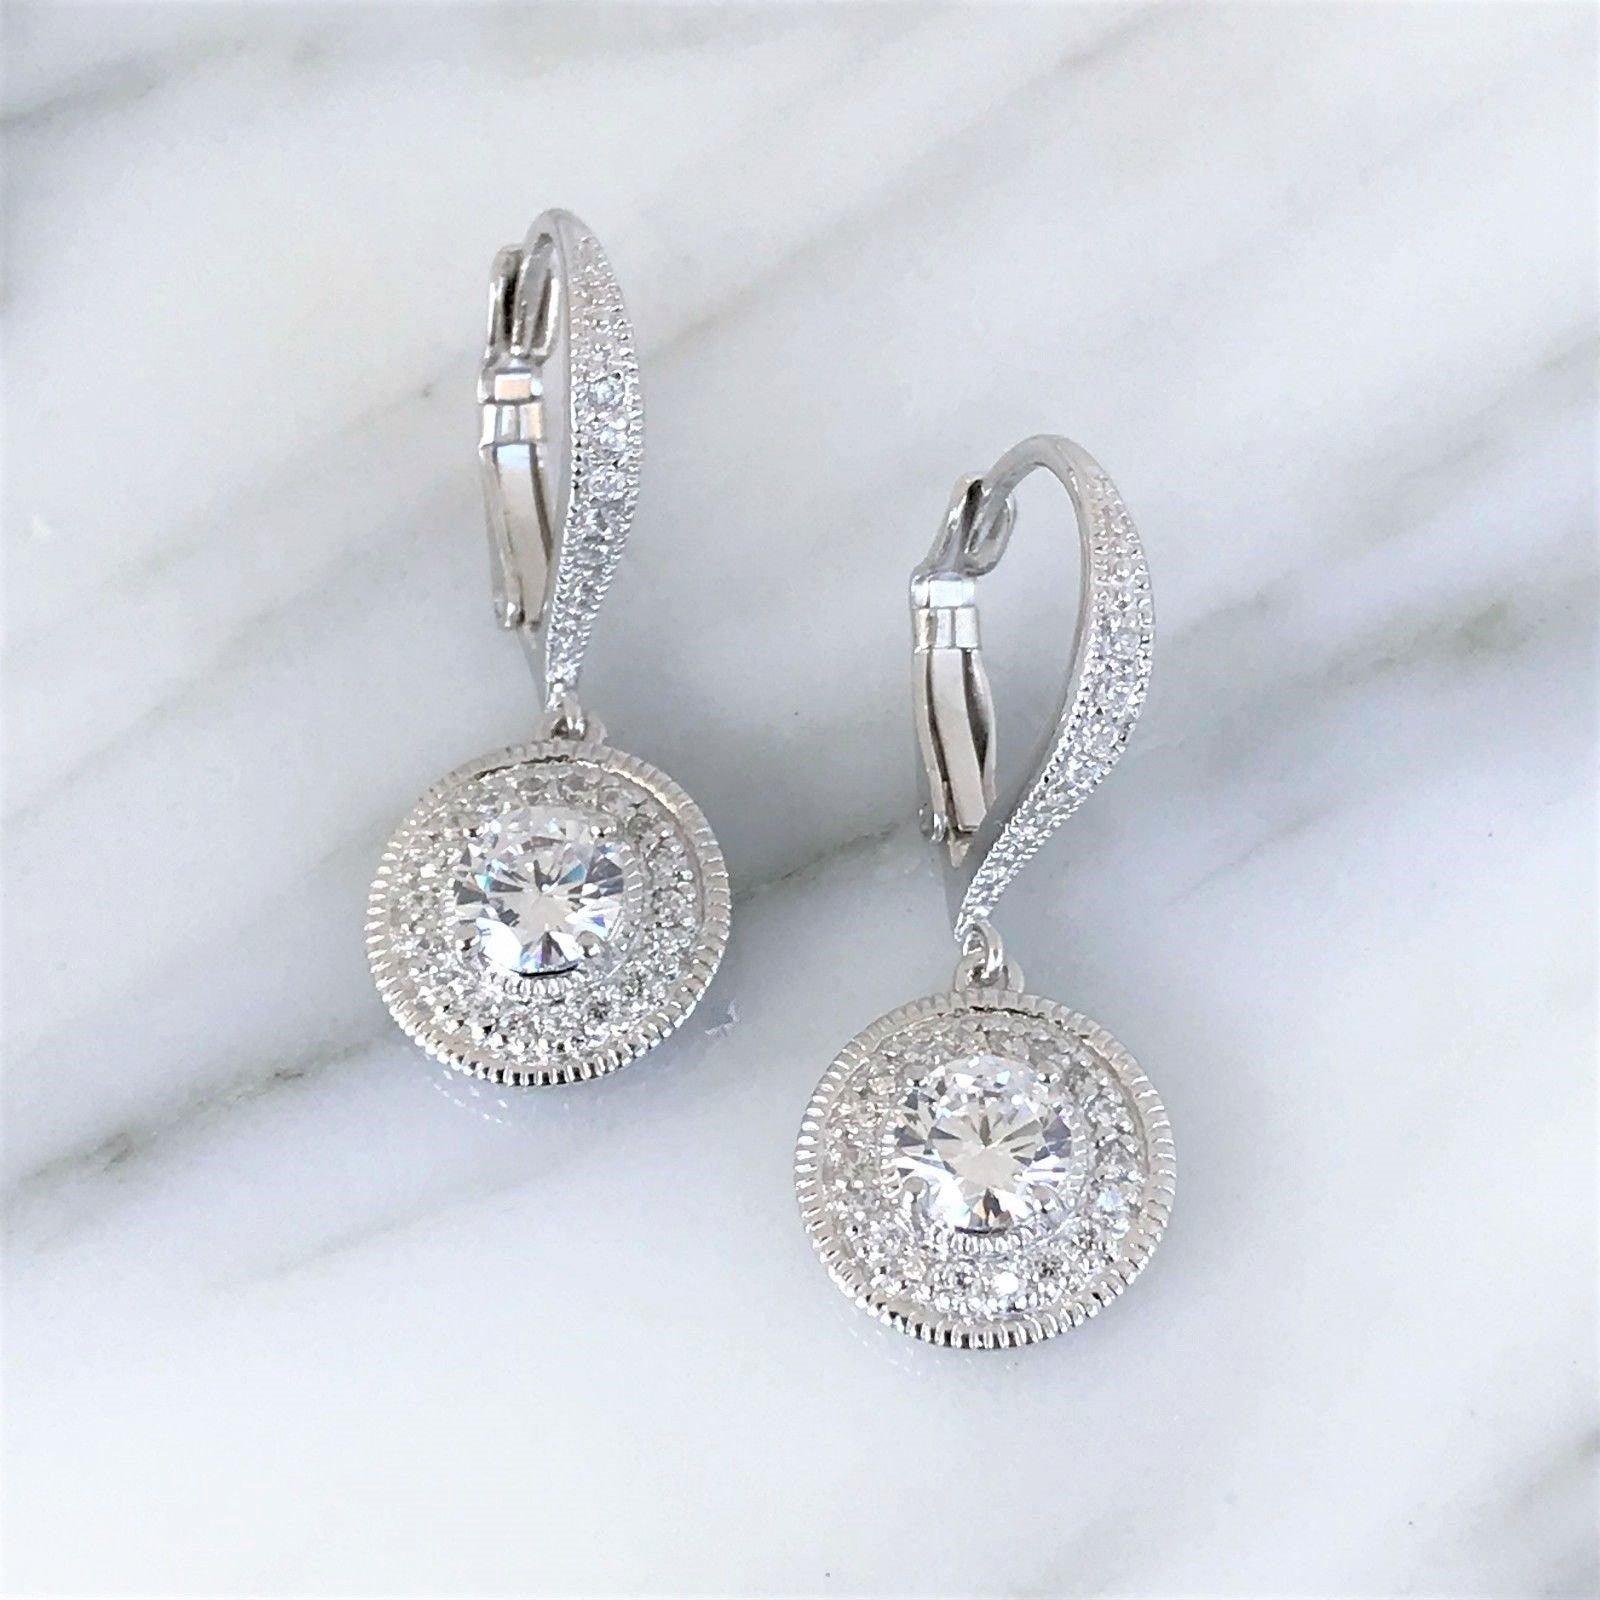 Sterling Silver Vintage Inspired CZ Halo Leverback Earrings - STERLING SILVER DESIGNS